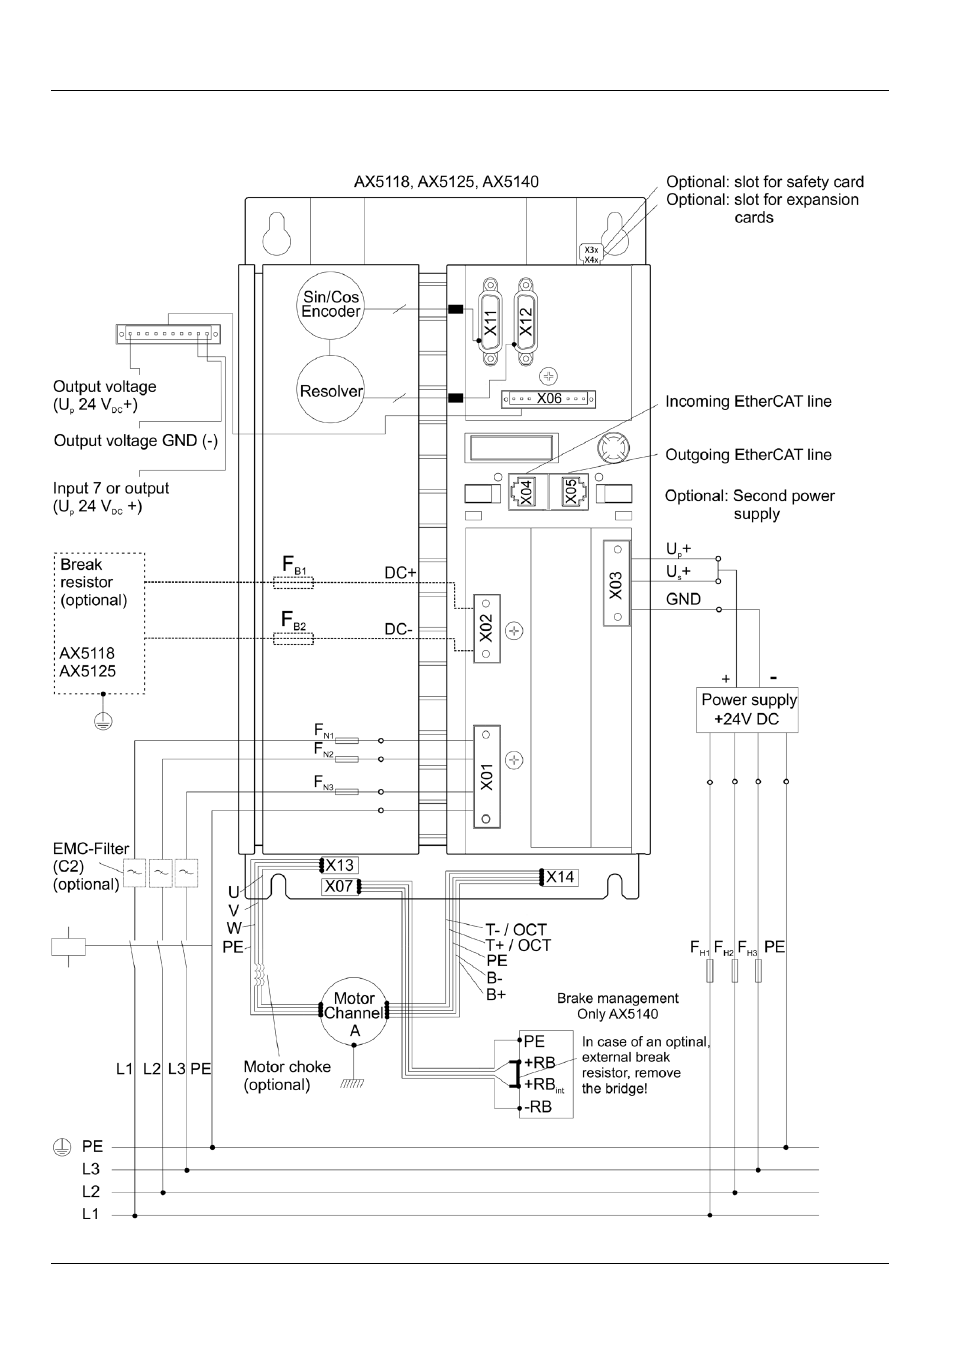 6 connection diagram ax5118, ax5125 and ax5140 | BECKHOFF AX5000 1,5 A - 40  A User Manual | Page 41 / 46